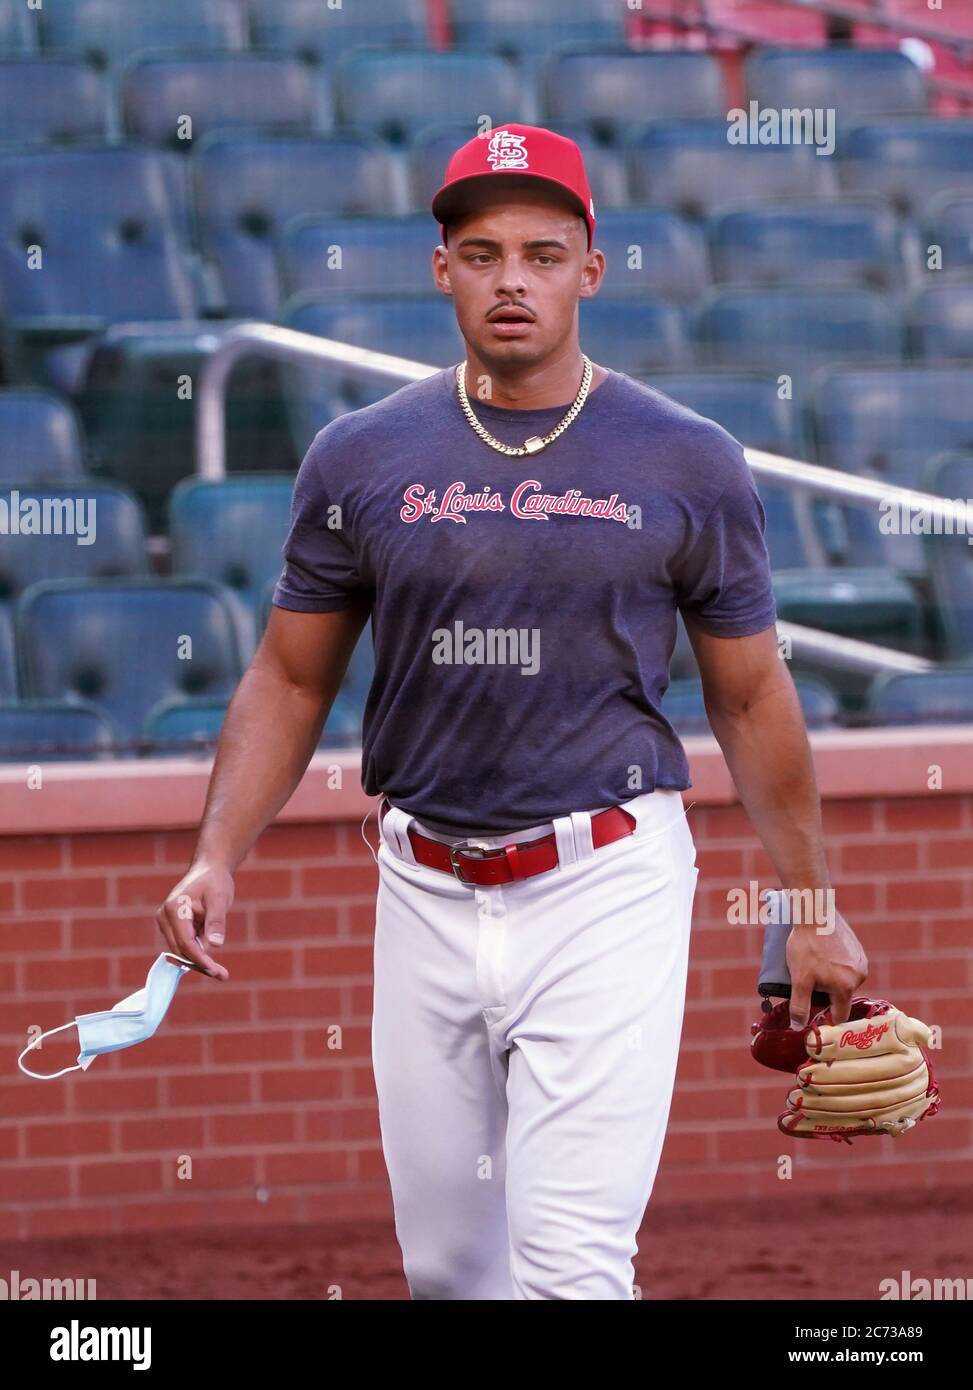 St. Louis, United States. 13th July, 2020. St. Louis Cardinals pitcher Jordan Hicks, shown in this July 10, 2020 file photo during Summer Camp at Busch Stadium in St. Louis, has announced he has opted out of the 2020 season, citing pre-existing health concerns, on Monday July 13, 2020. Hicks, 23, is currently recovering from “Tommy John” elbow surgery performed last June. File Photo by Bill Greenblatt/UPI Credit: UPI/Alamy Live News Stock Photo